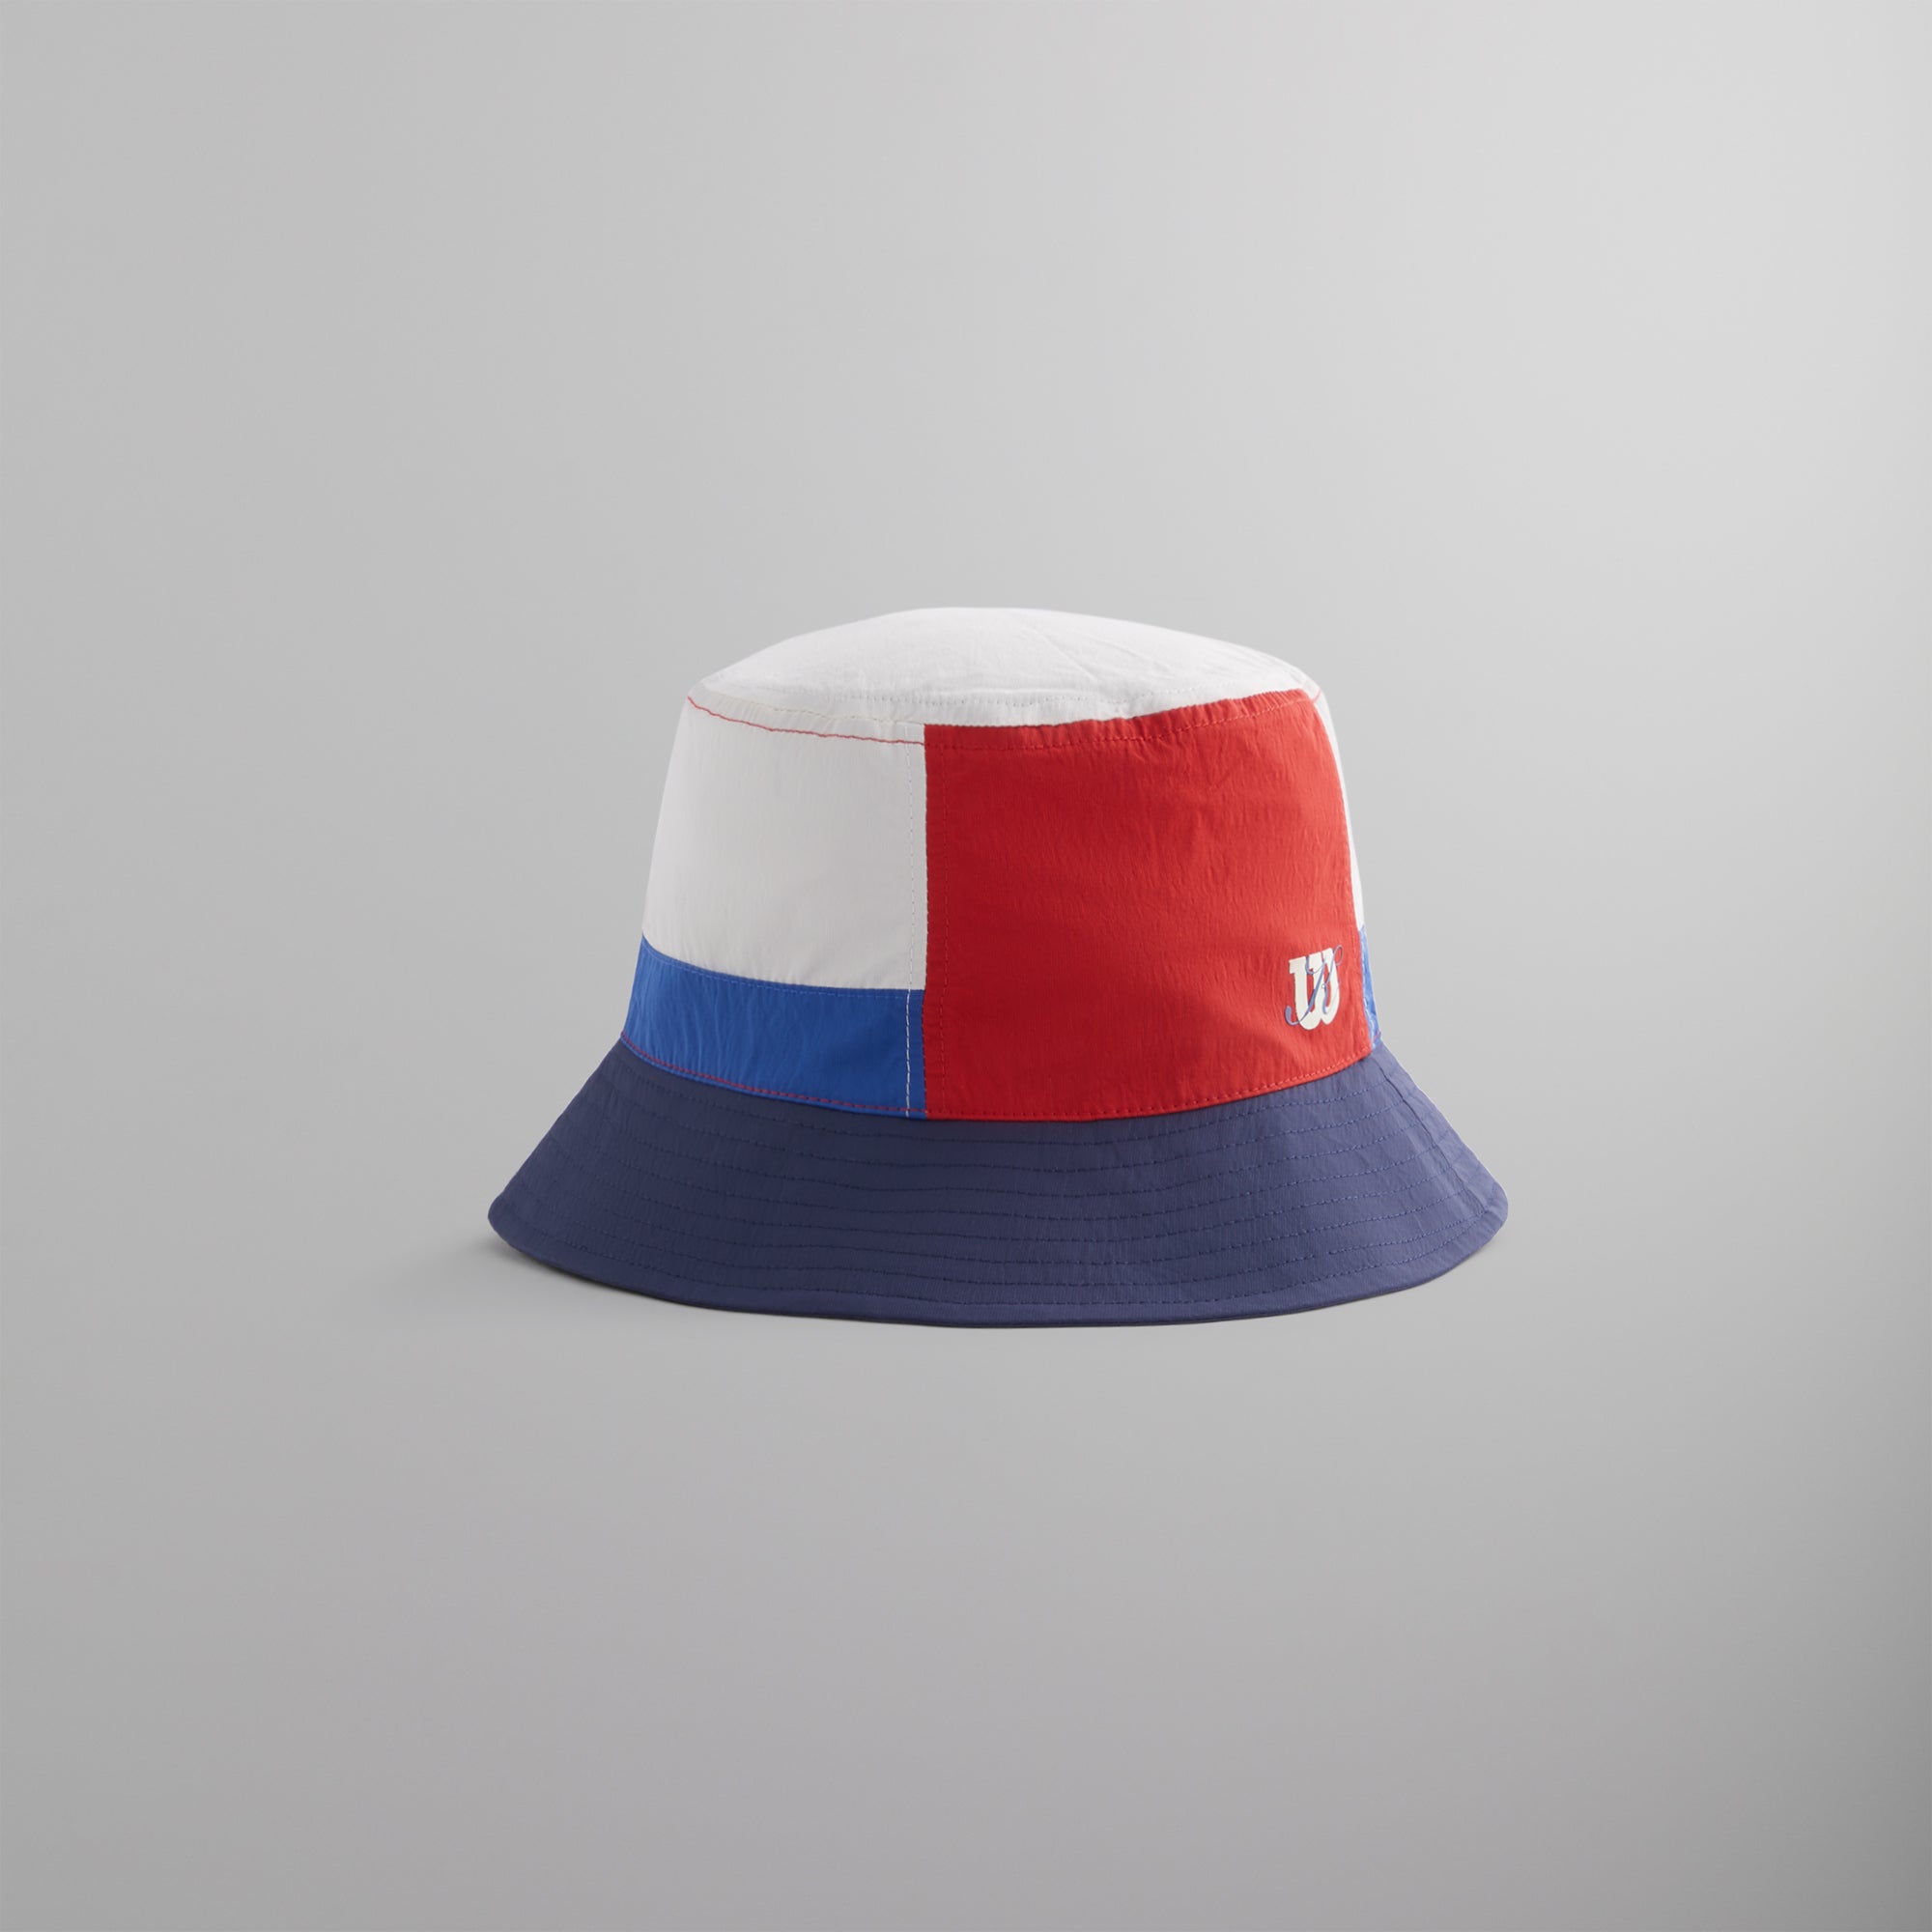 Kith for Wilson Emblem Logo Colorblocked Bucket Hat - Rival